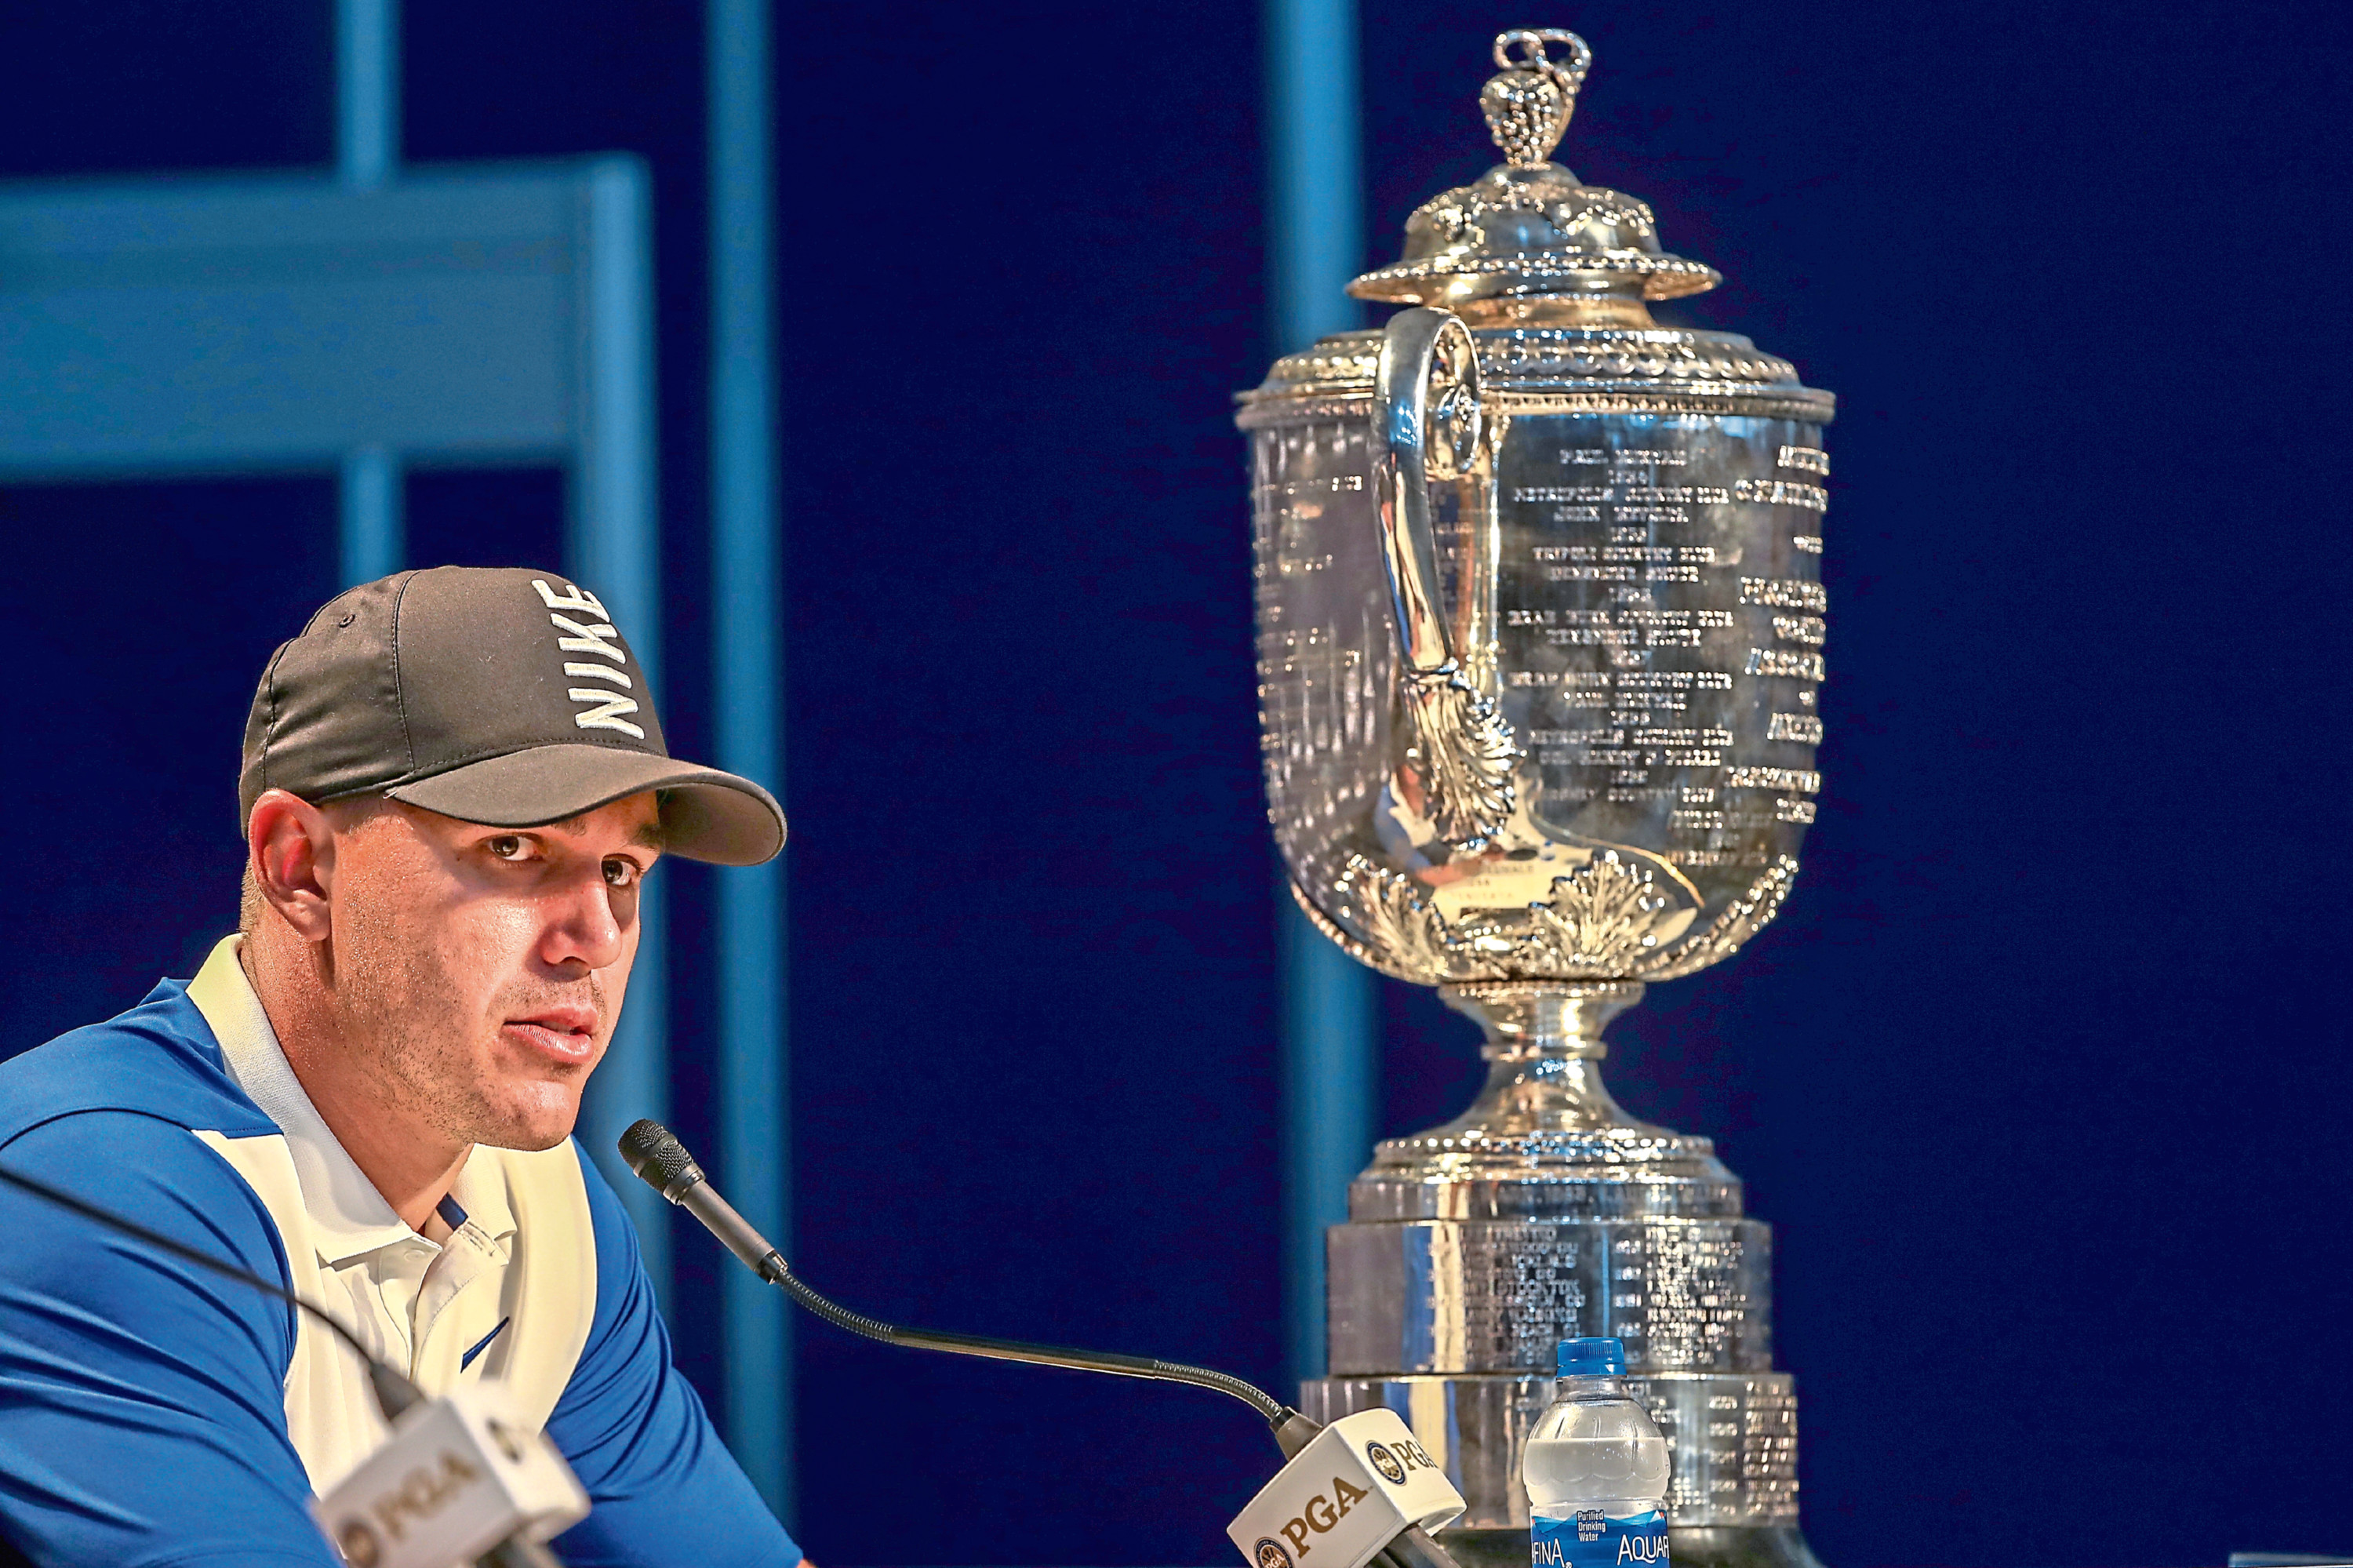 FARMINGDALE, NEW YORK - MAY 19: Brooks Koepka of the United States sits alongside the Wanamaker Trophy as he speaks to the media during a press conference after winning during the final round of the 2019 PGA Championship at the Bethpage Black course on May 19, 2019 in Farmingdale, New York. (Photo by Jamie Squire/Getty Images)